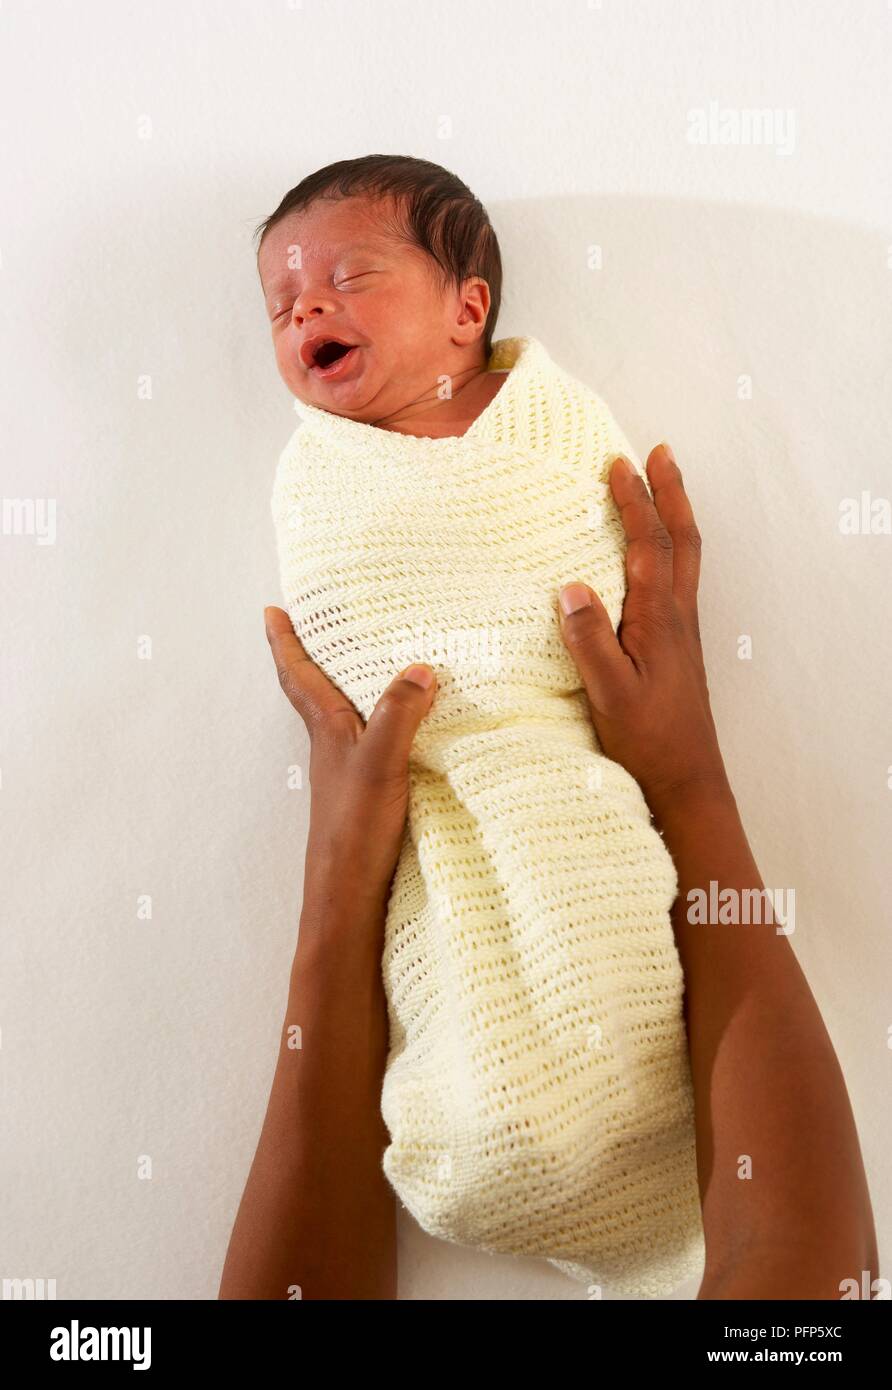 Woman's hands around a baby boy wrapped in baby blanket Stock Photo